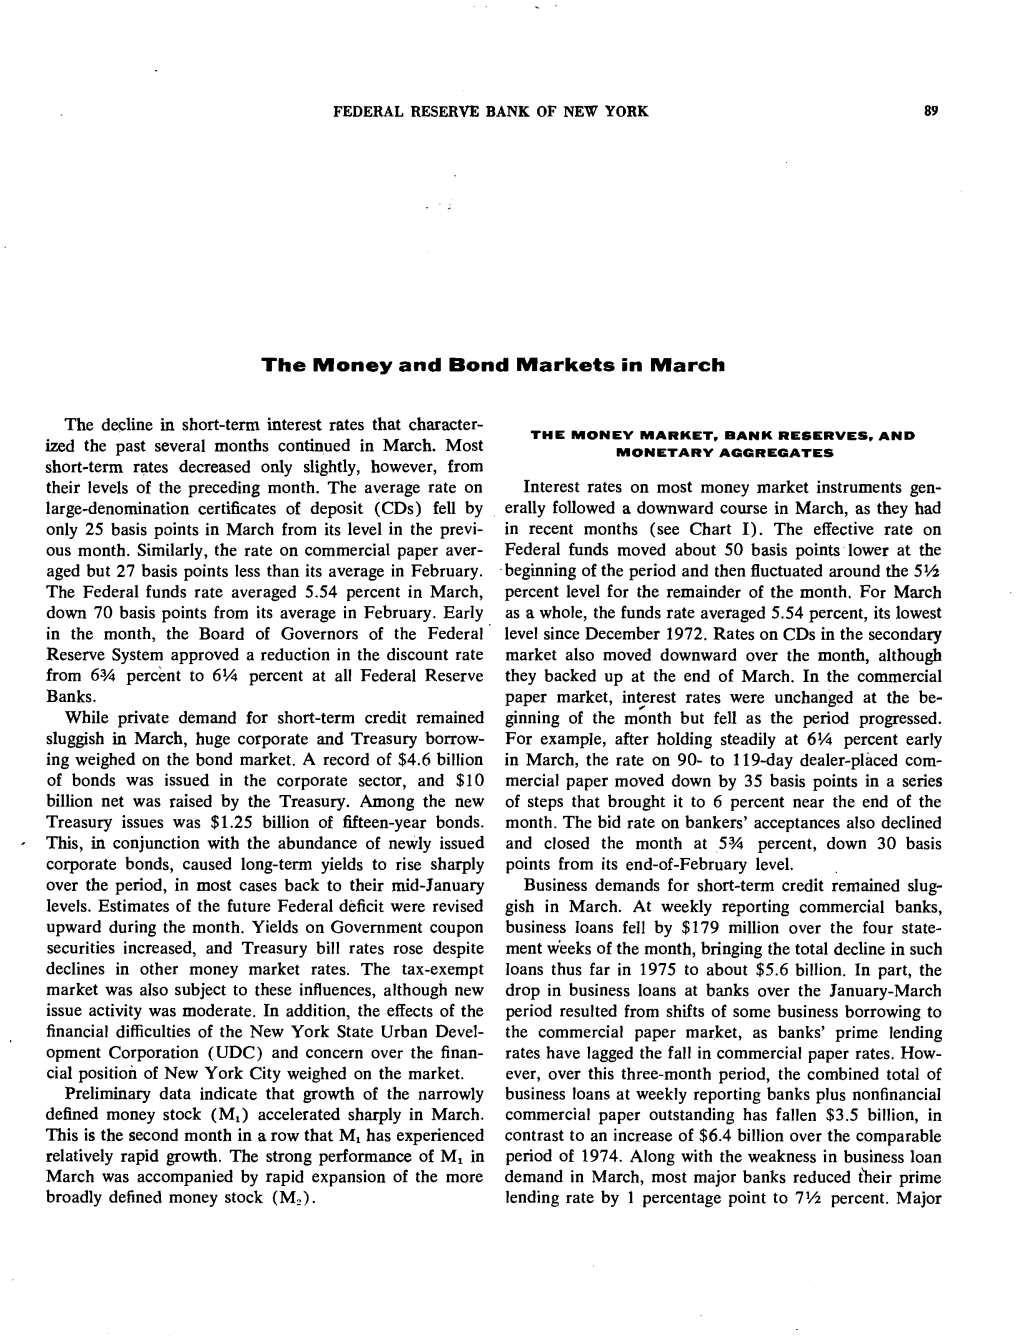 The Money and Bond Markets in March 1975